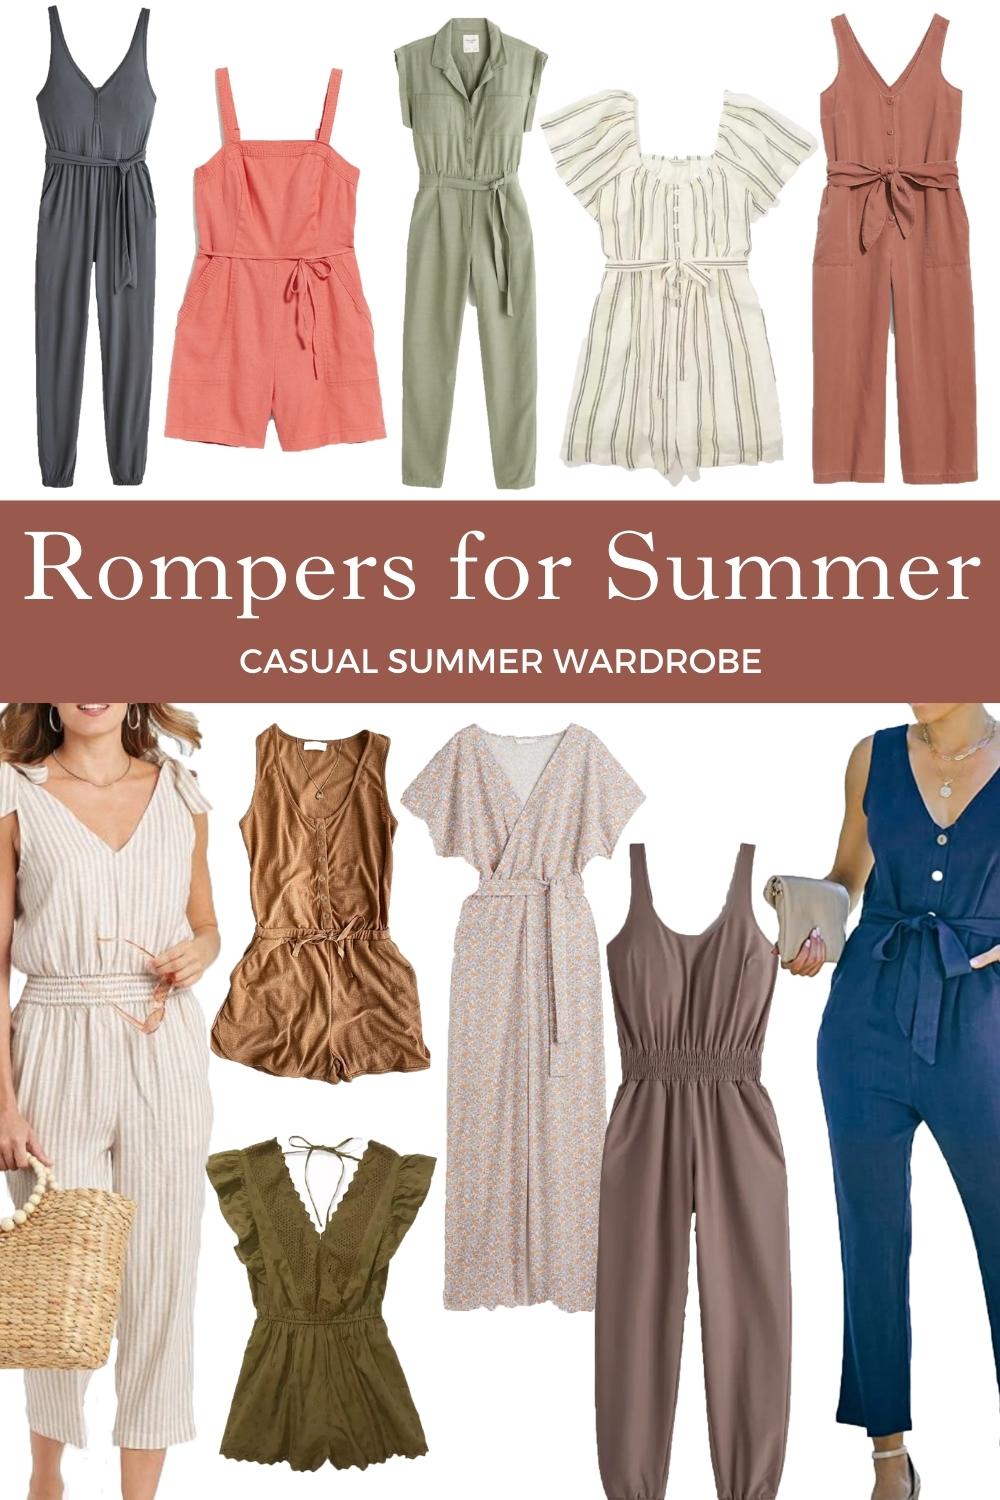 Rompers for summer